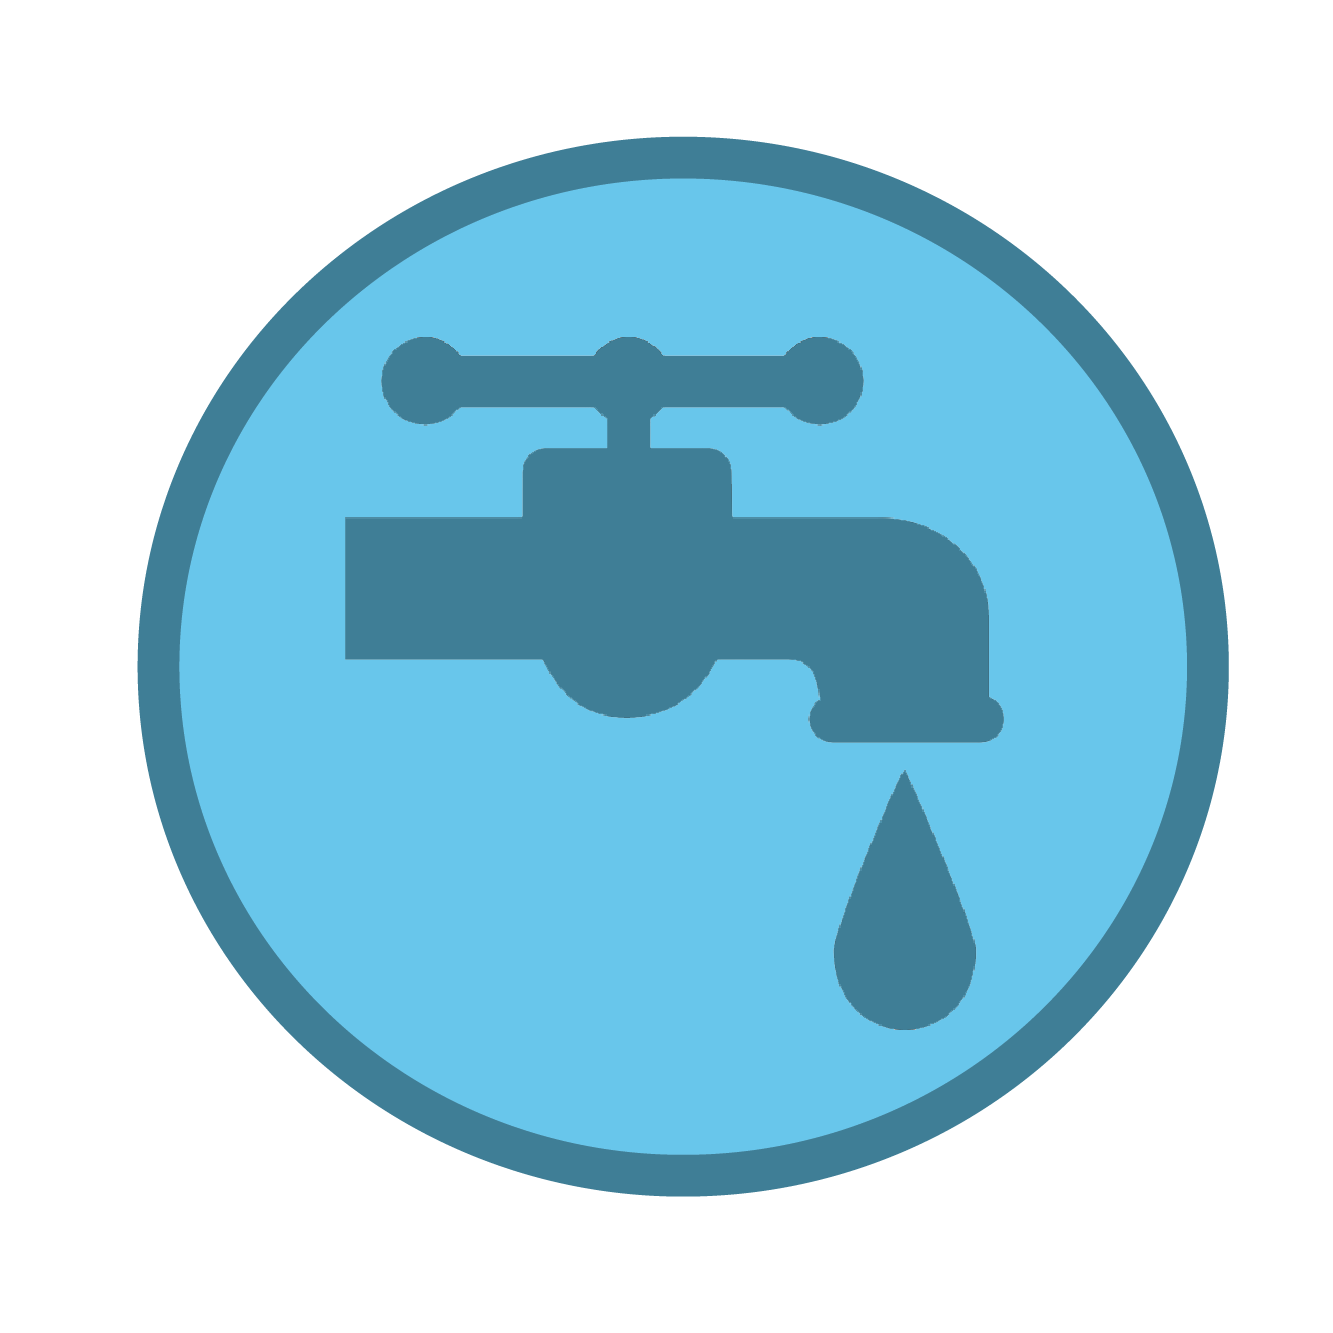 Chlorine & Drinking Water: Update on Chlorine Disinfection Regulations